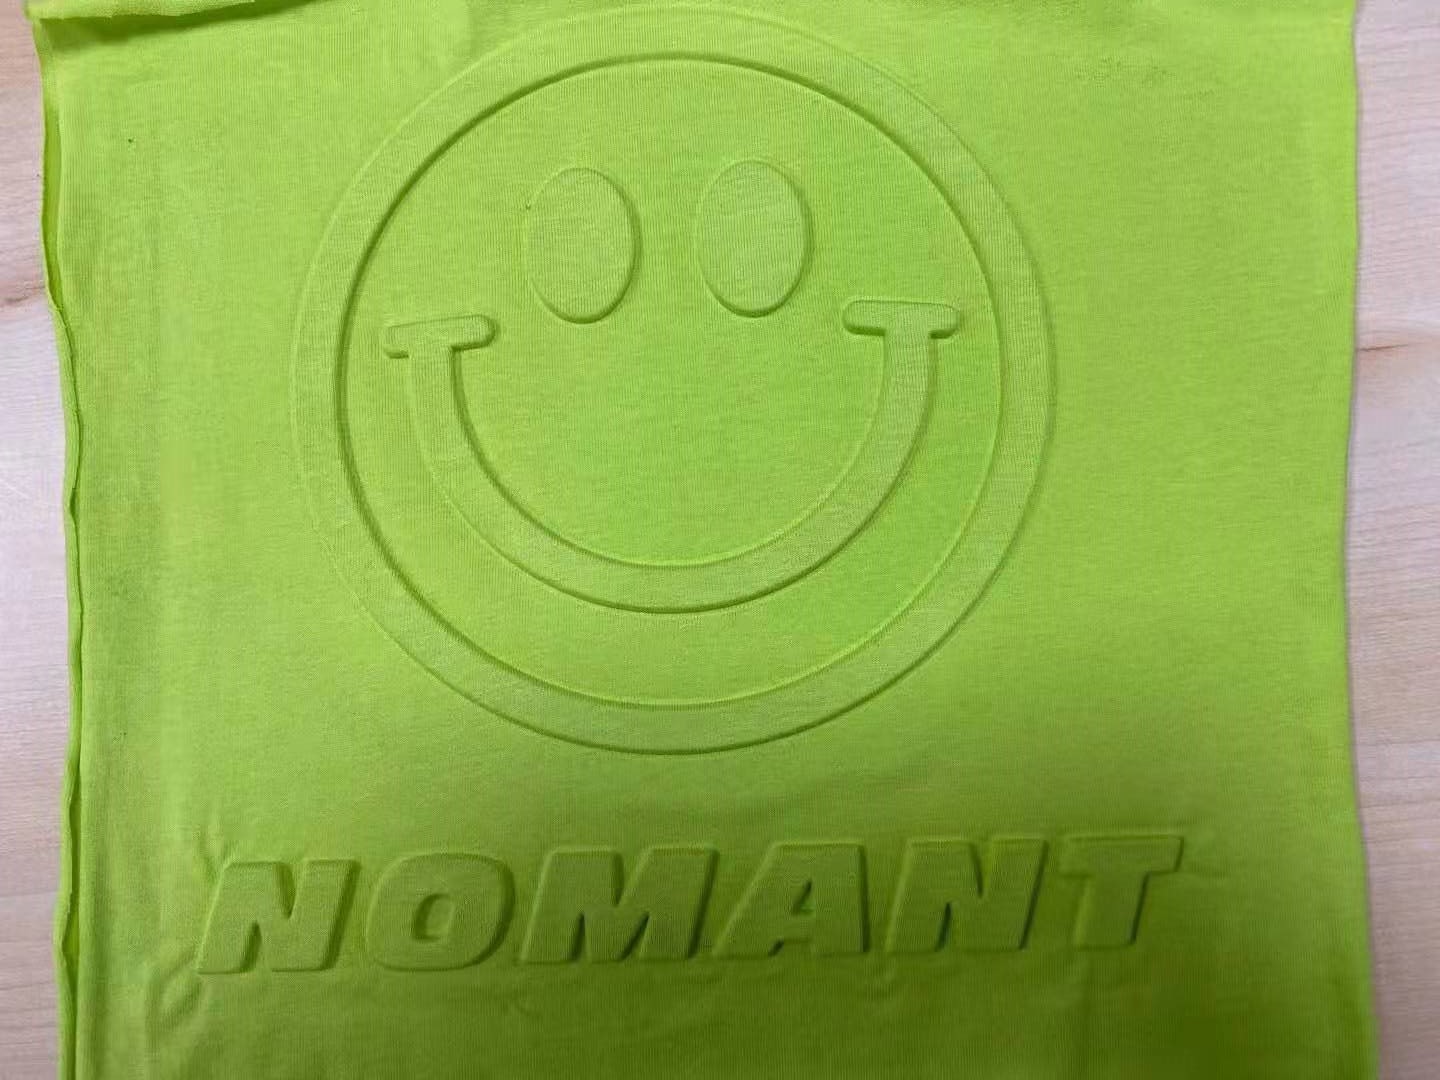 NOMANT Embossing Silicone for Textile Screen Printing Ink on the fabric garment